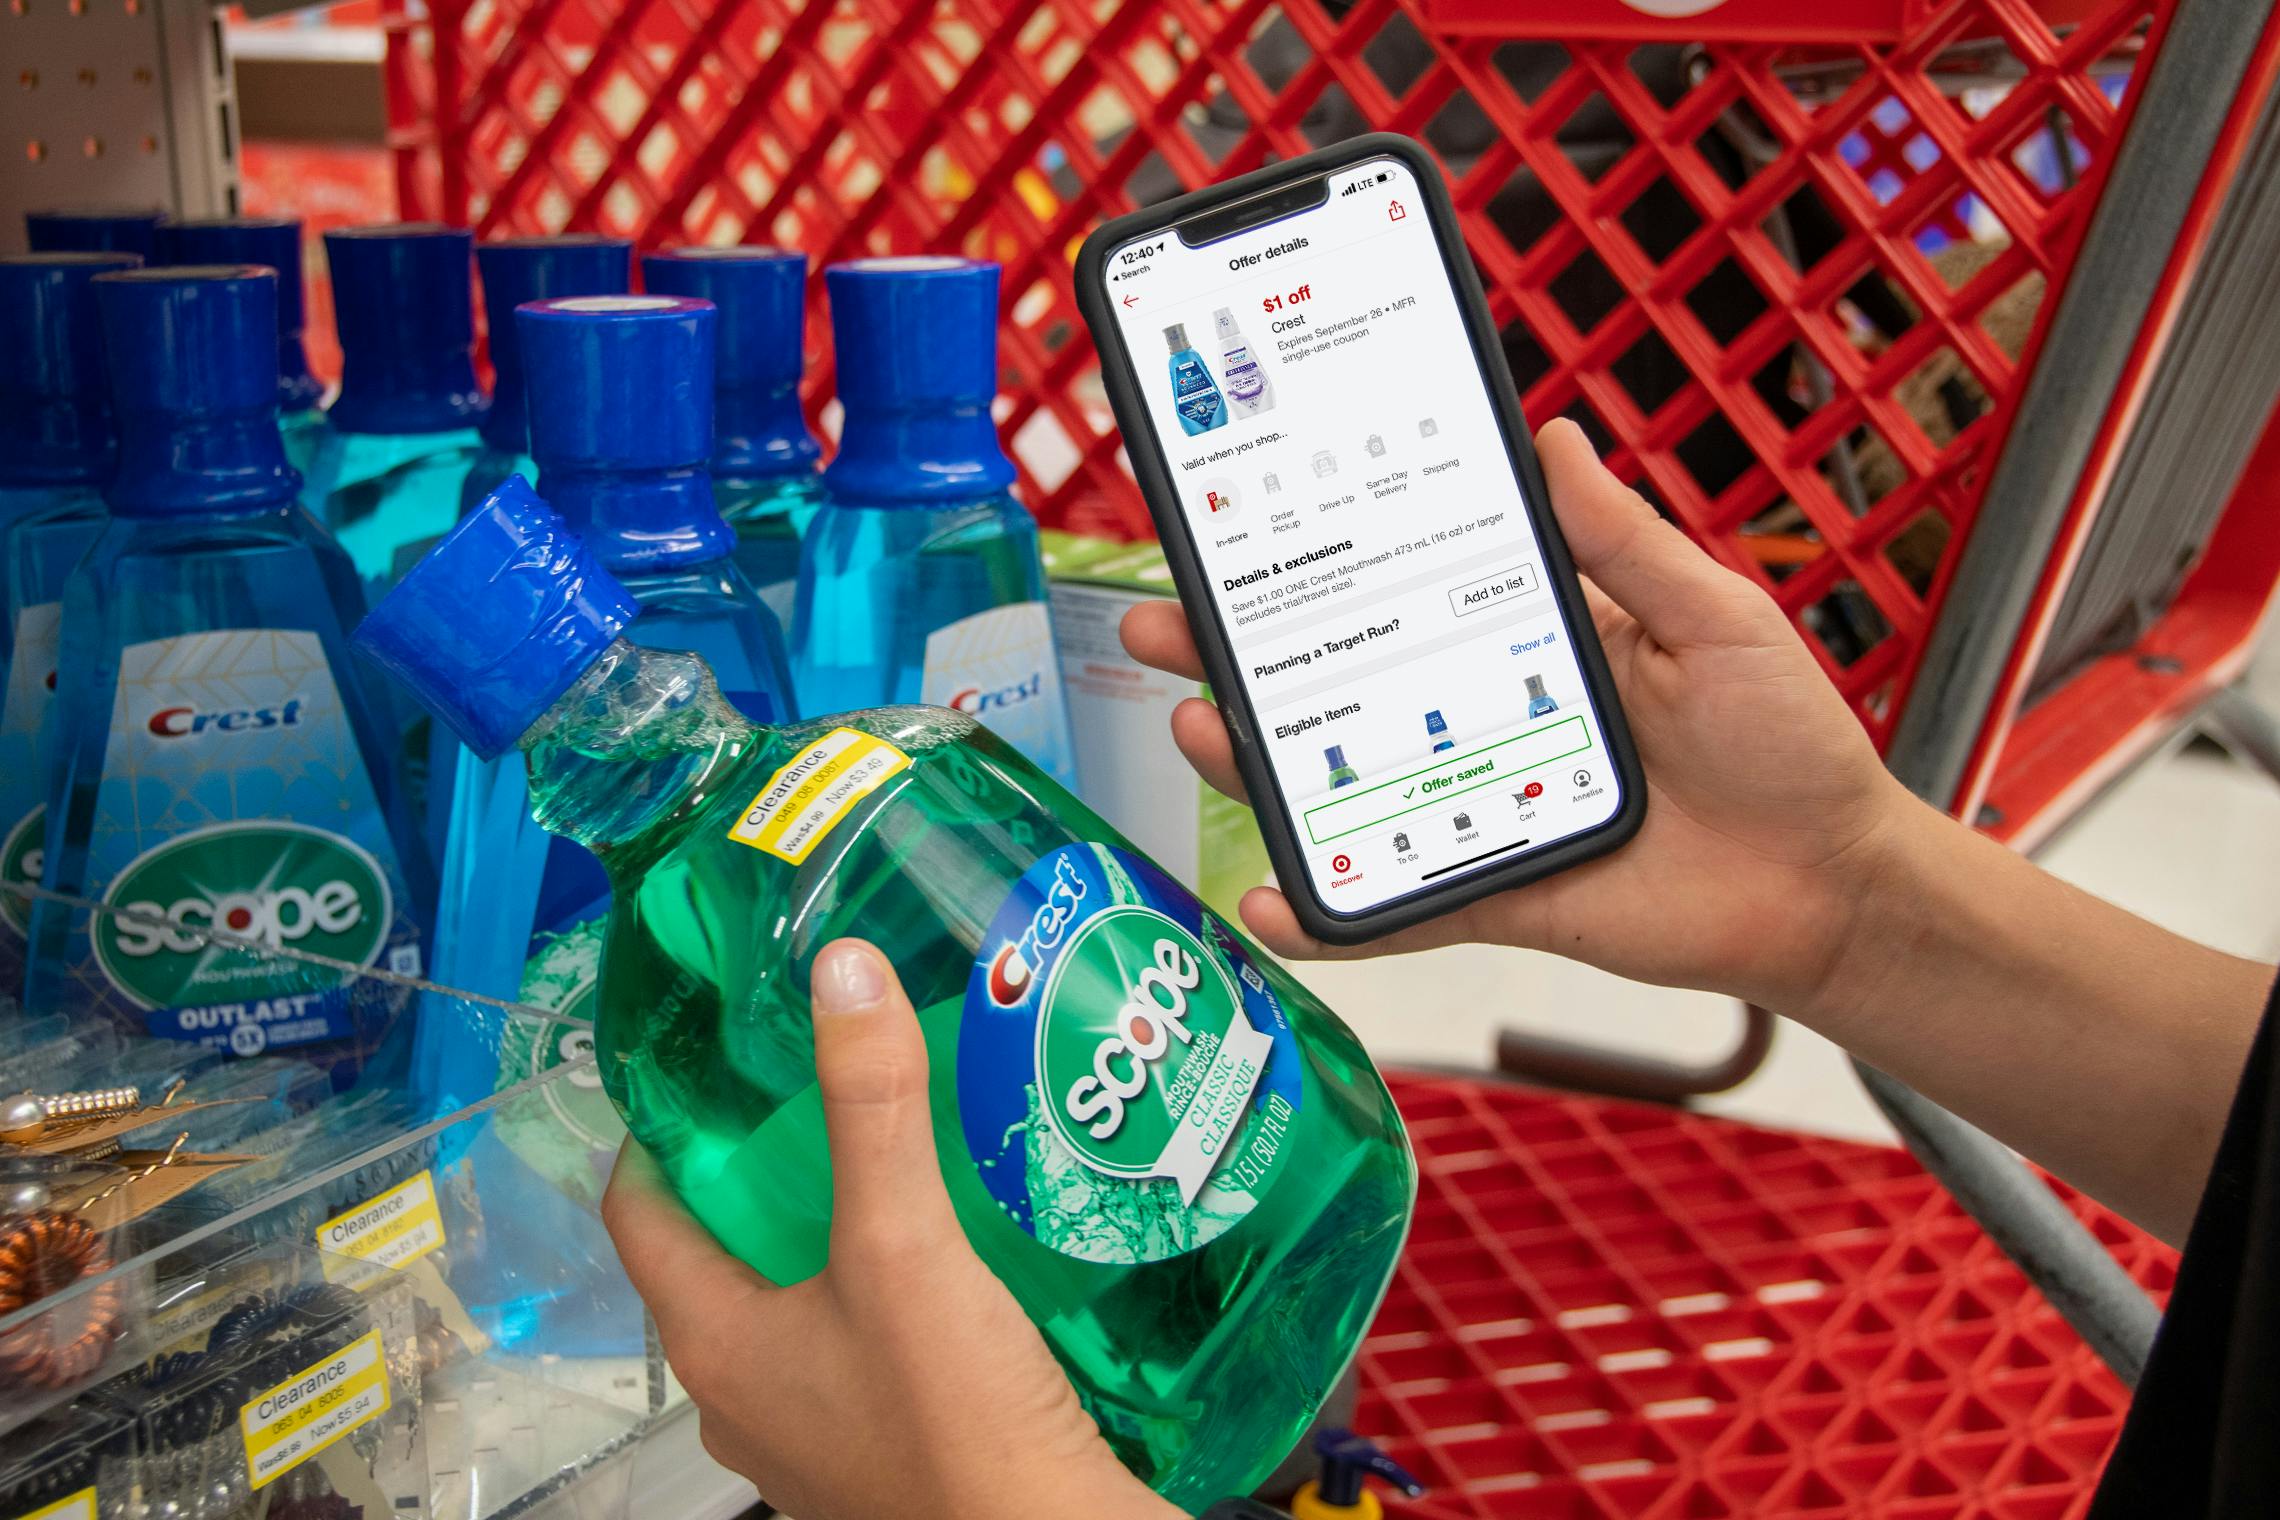 A person holding their phone displaying a Target circle app coupon next to a bottle of Scope mouthwash with a clearance sticker in Target.